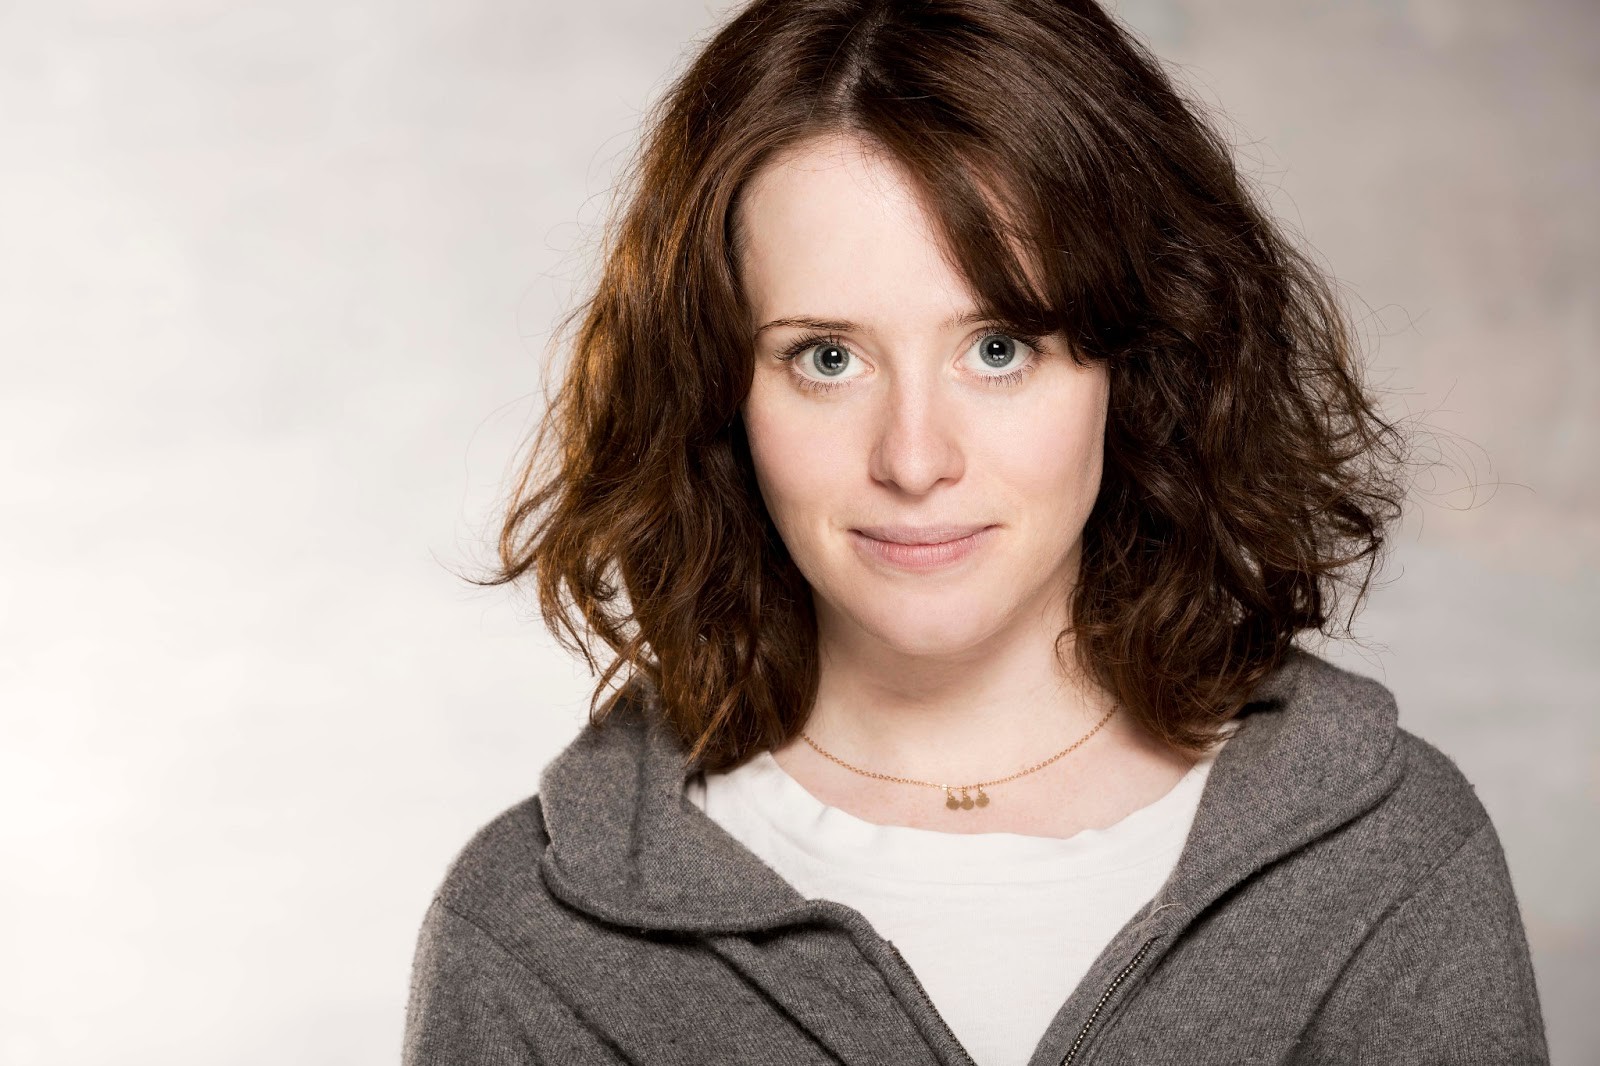 women claire foy blue eyes smiling Wallpaper